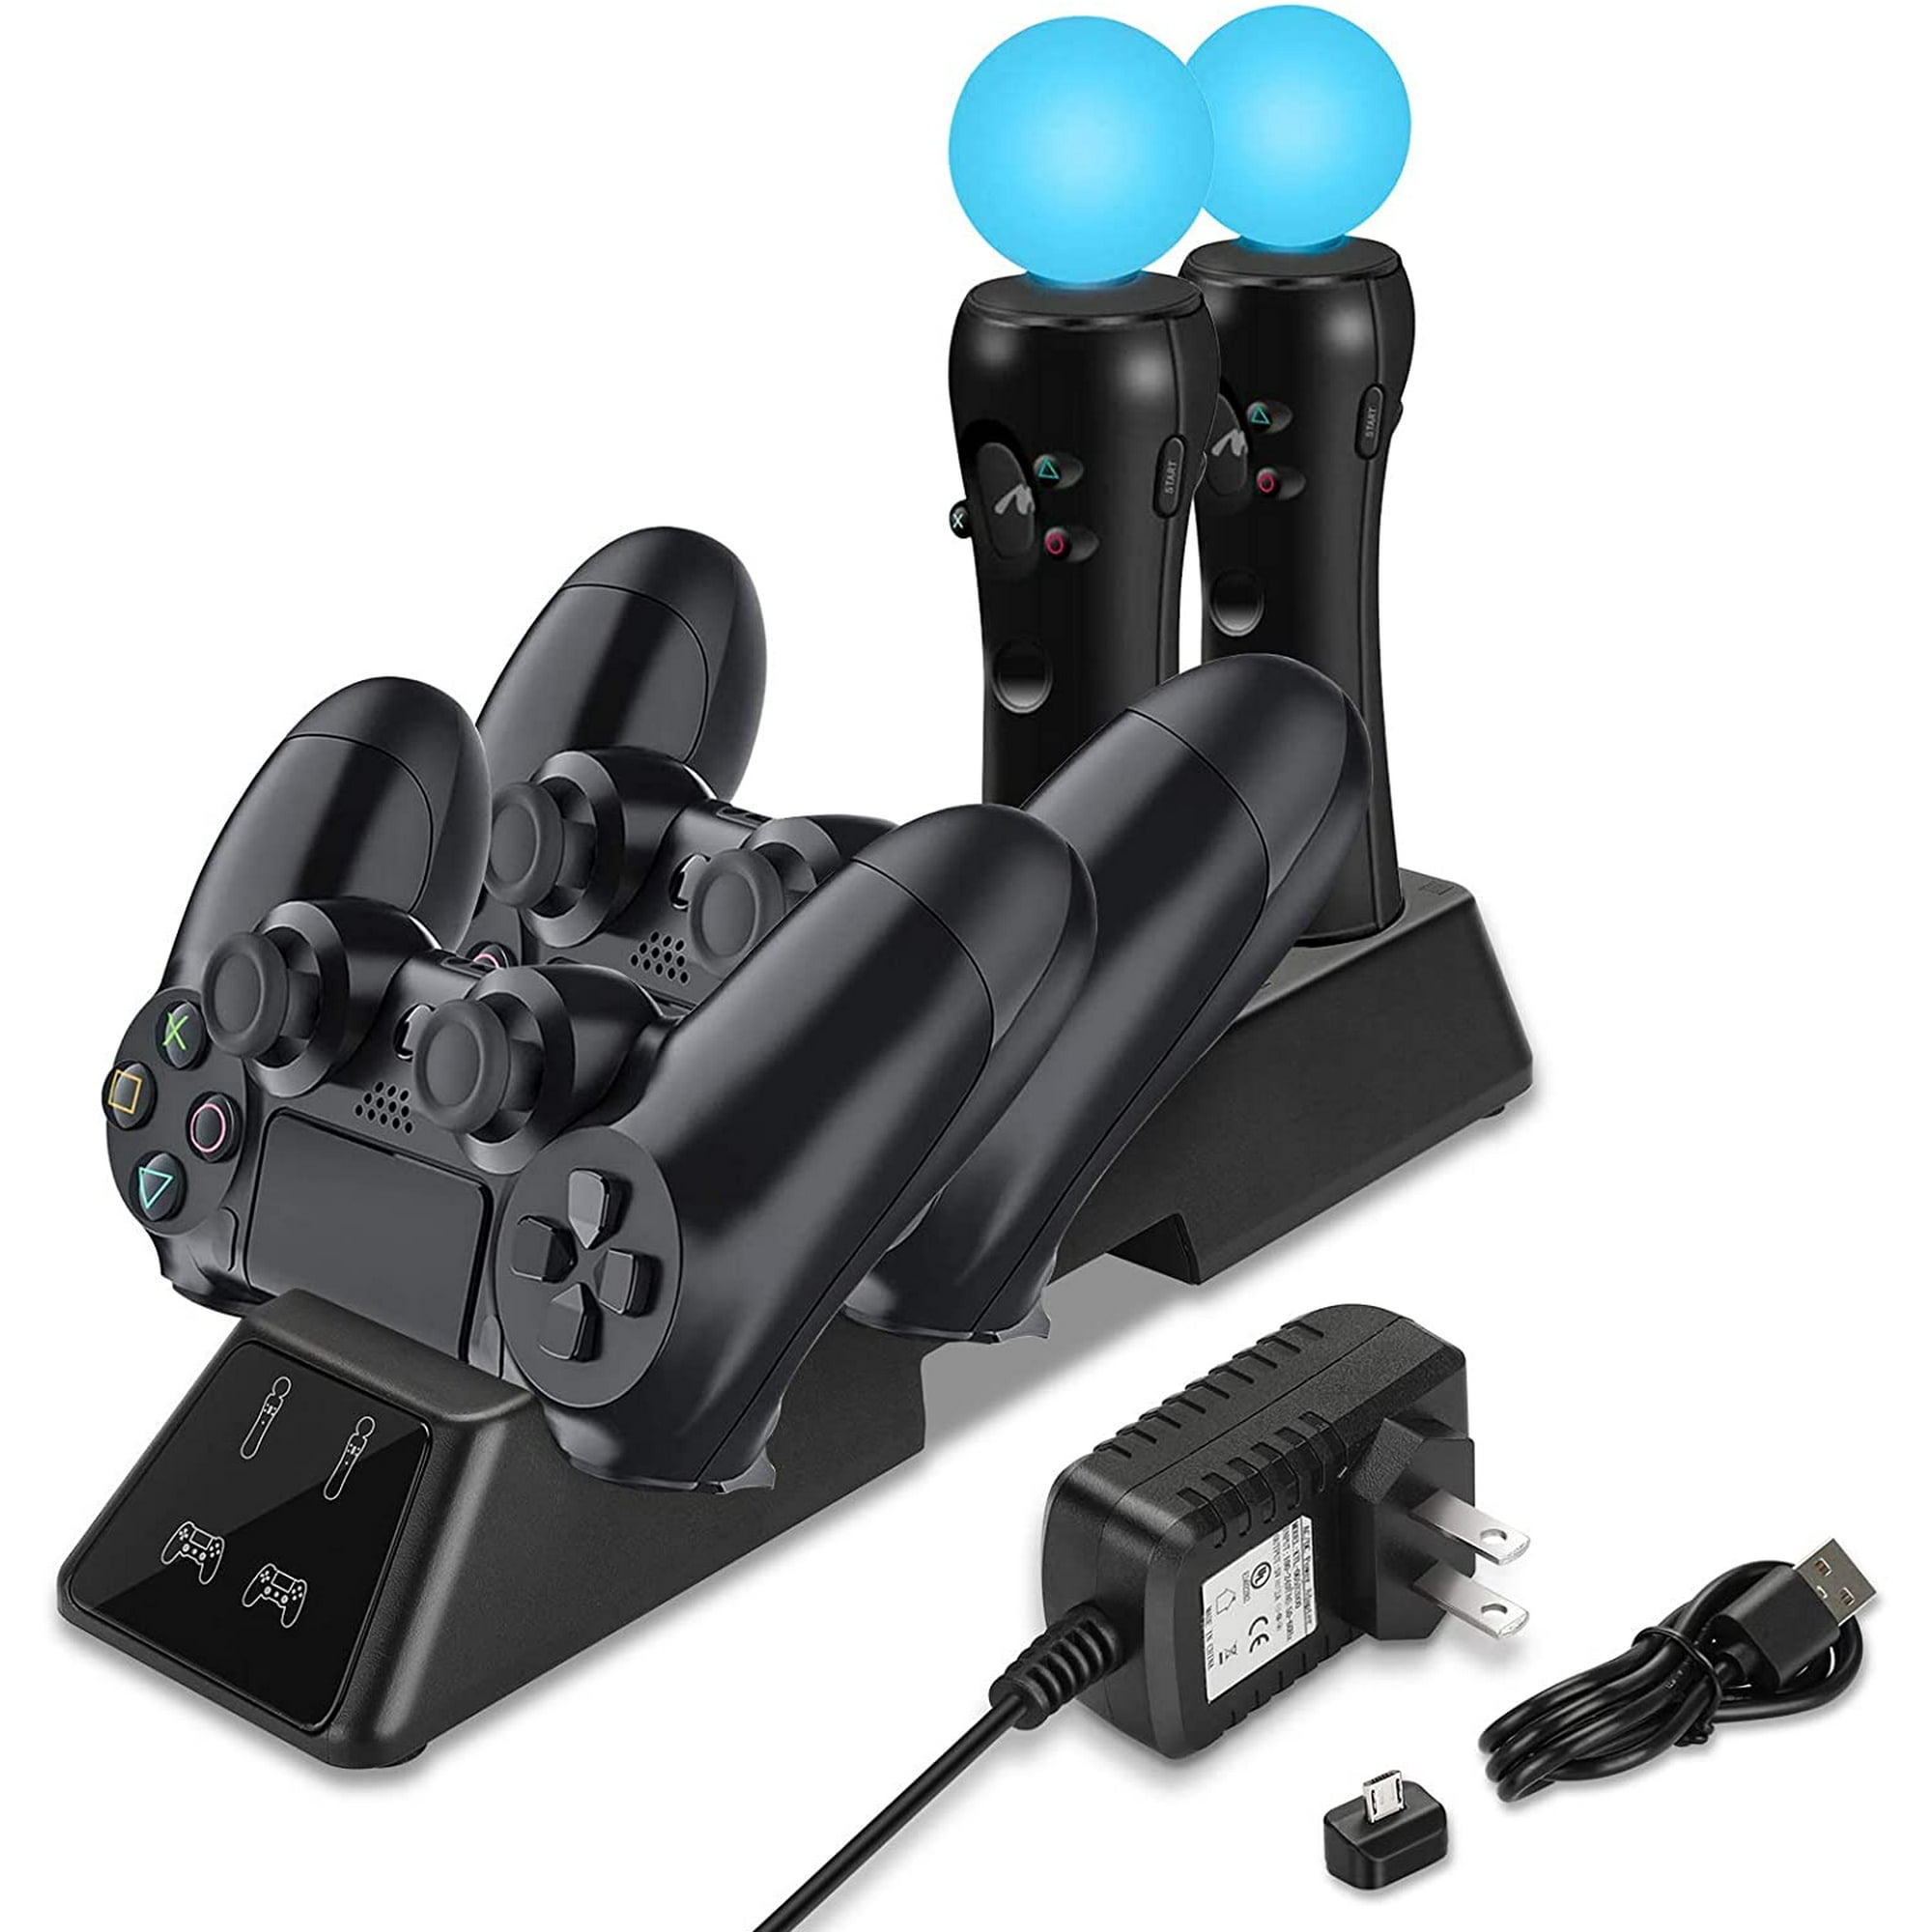 Upgraded PS4 Controller Charger, 4 in 1 Controller Charging Station Dock with Wall Adaptor, Quad Charger Compatible Playstation4 / PS4 / PS4 Slim / PS4 Pro Controller | Walmart Canada